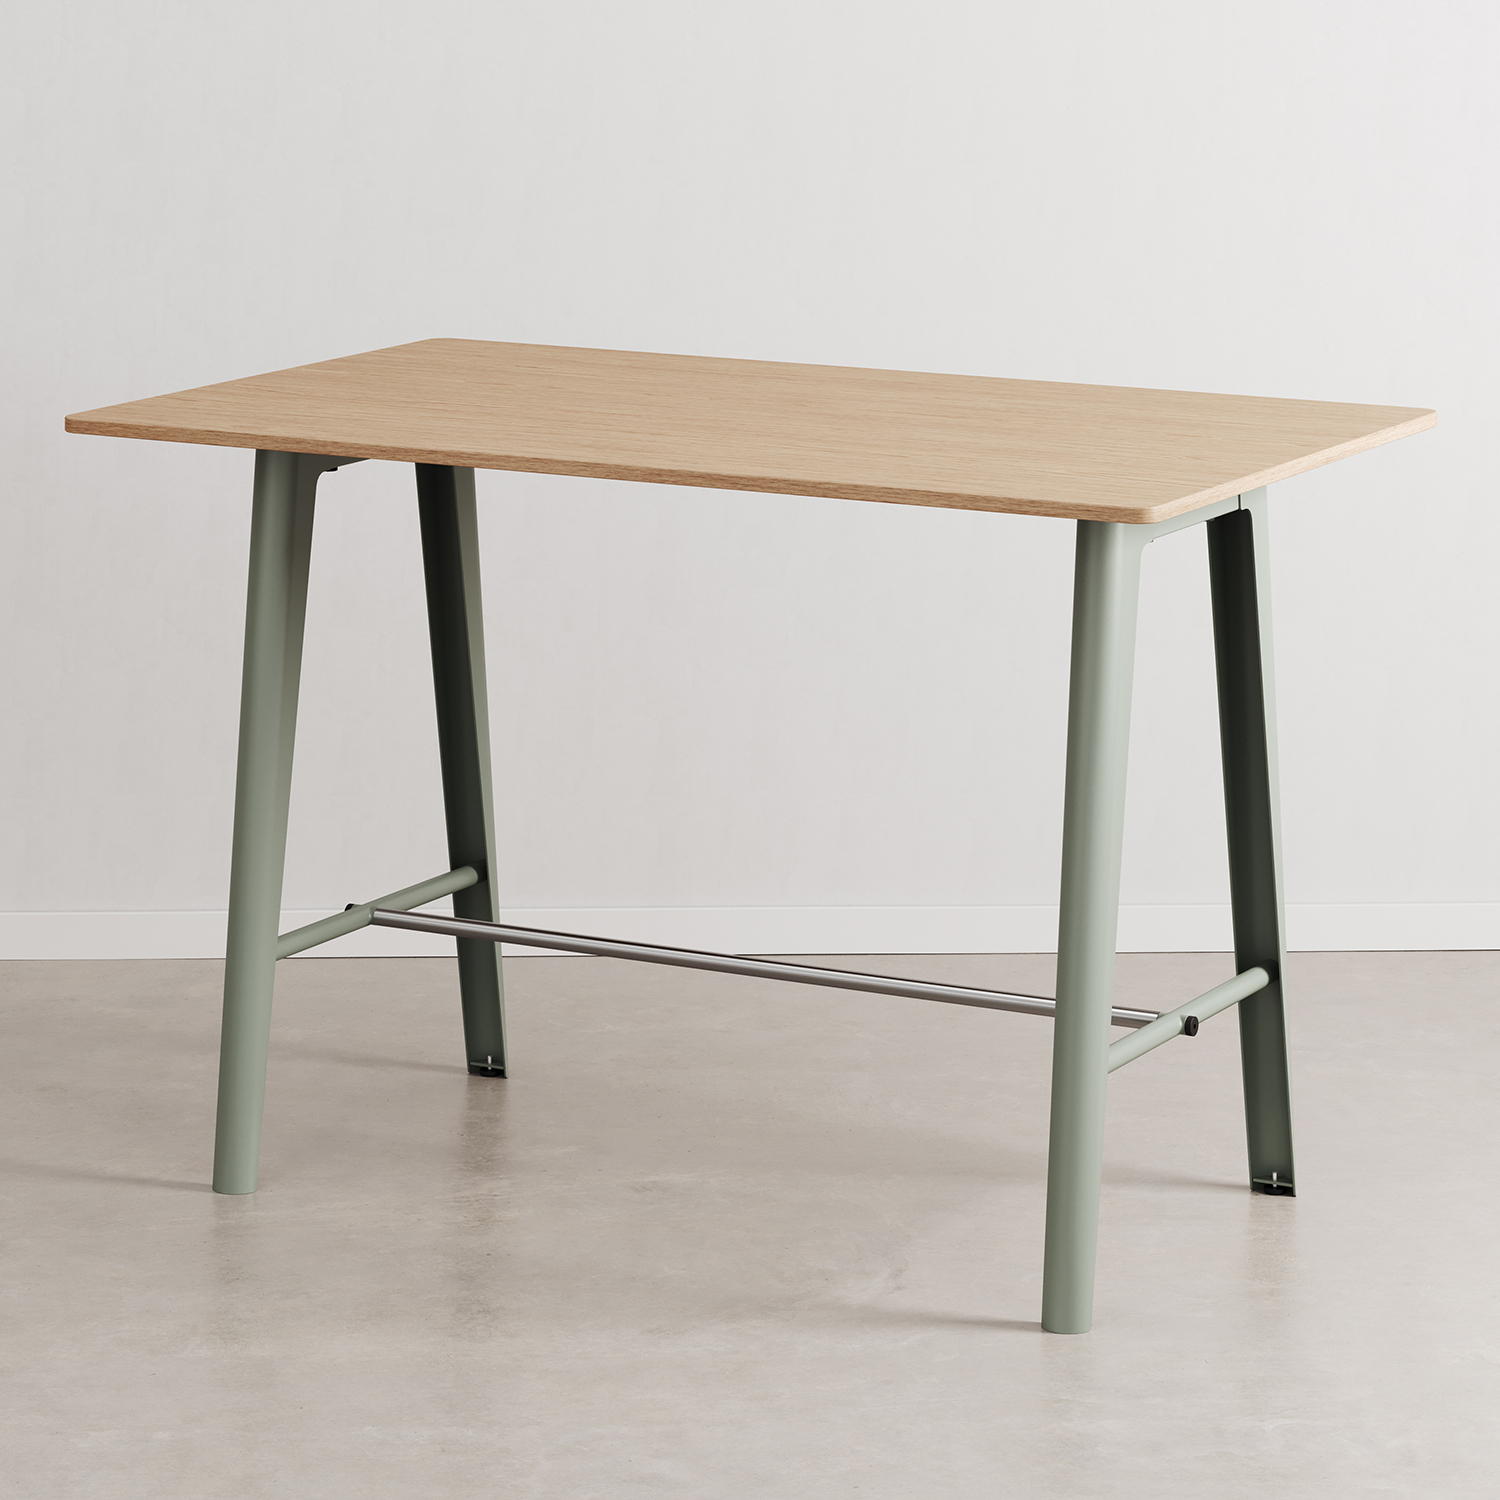 NEW MODERN high table - height 90 or 105cm - eco-certified wood